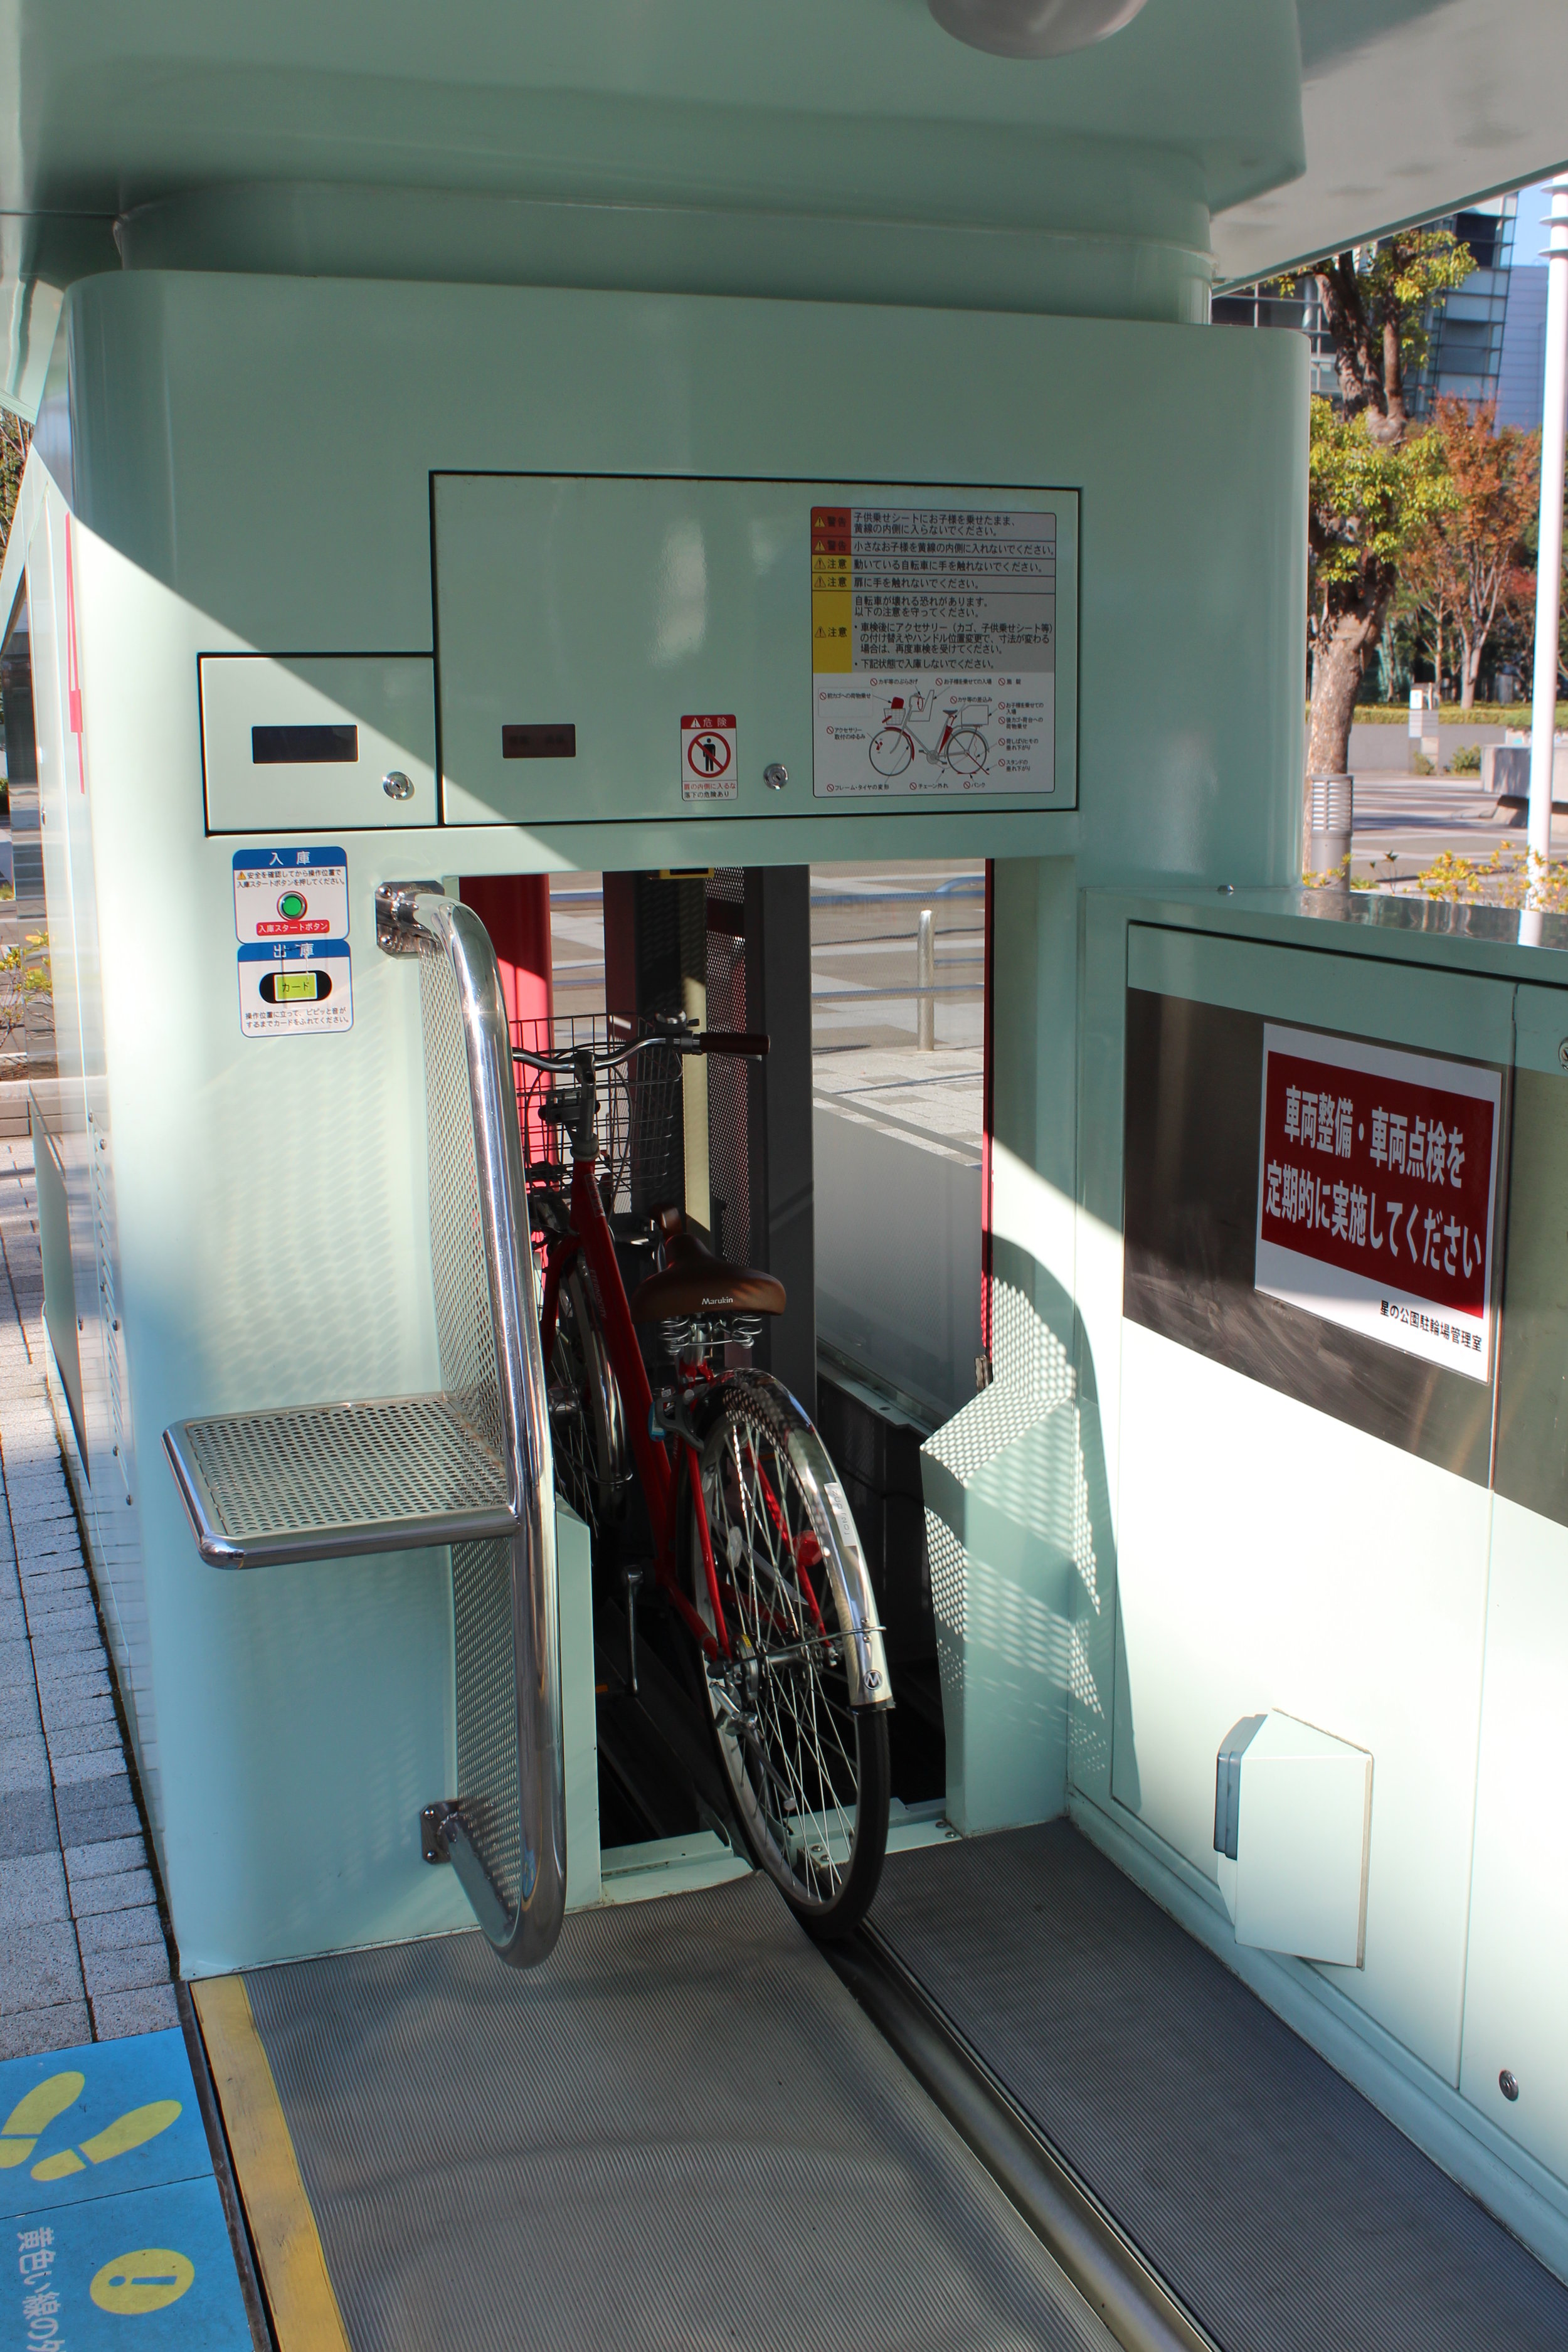  Amazing Tokyo bike parking pulls bike into device and in seconds it's in a secure underground carousel. 